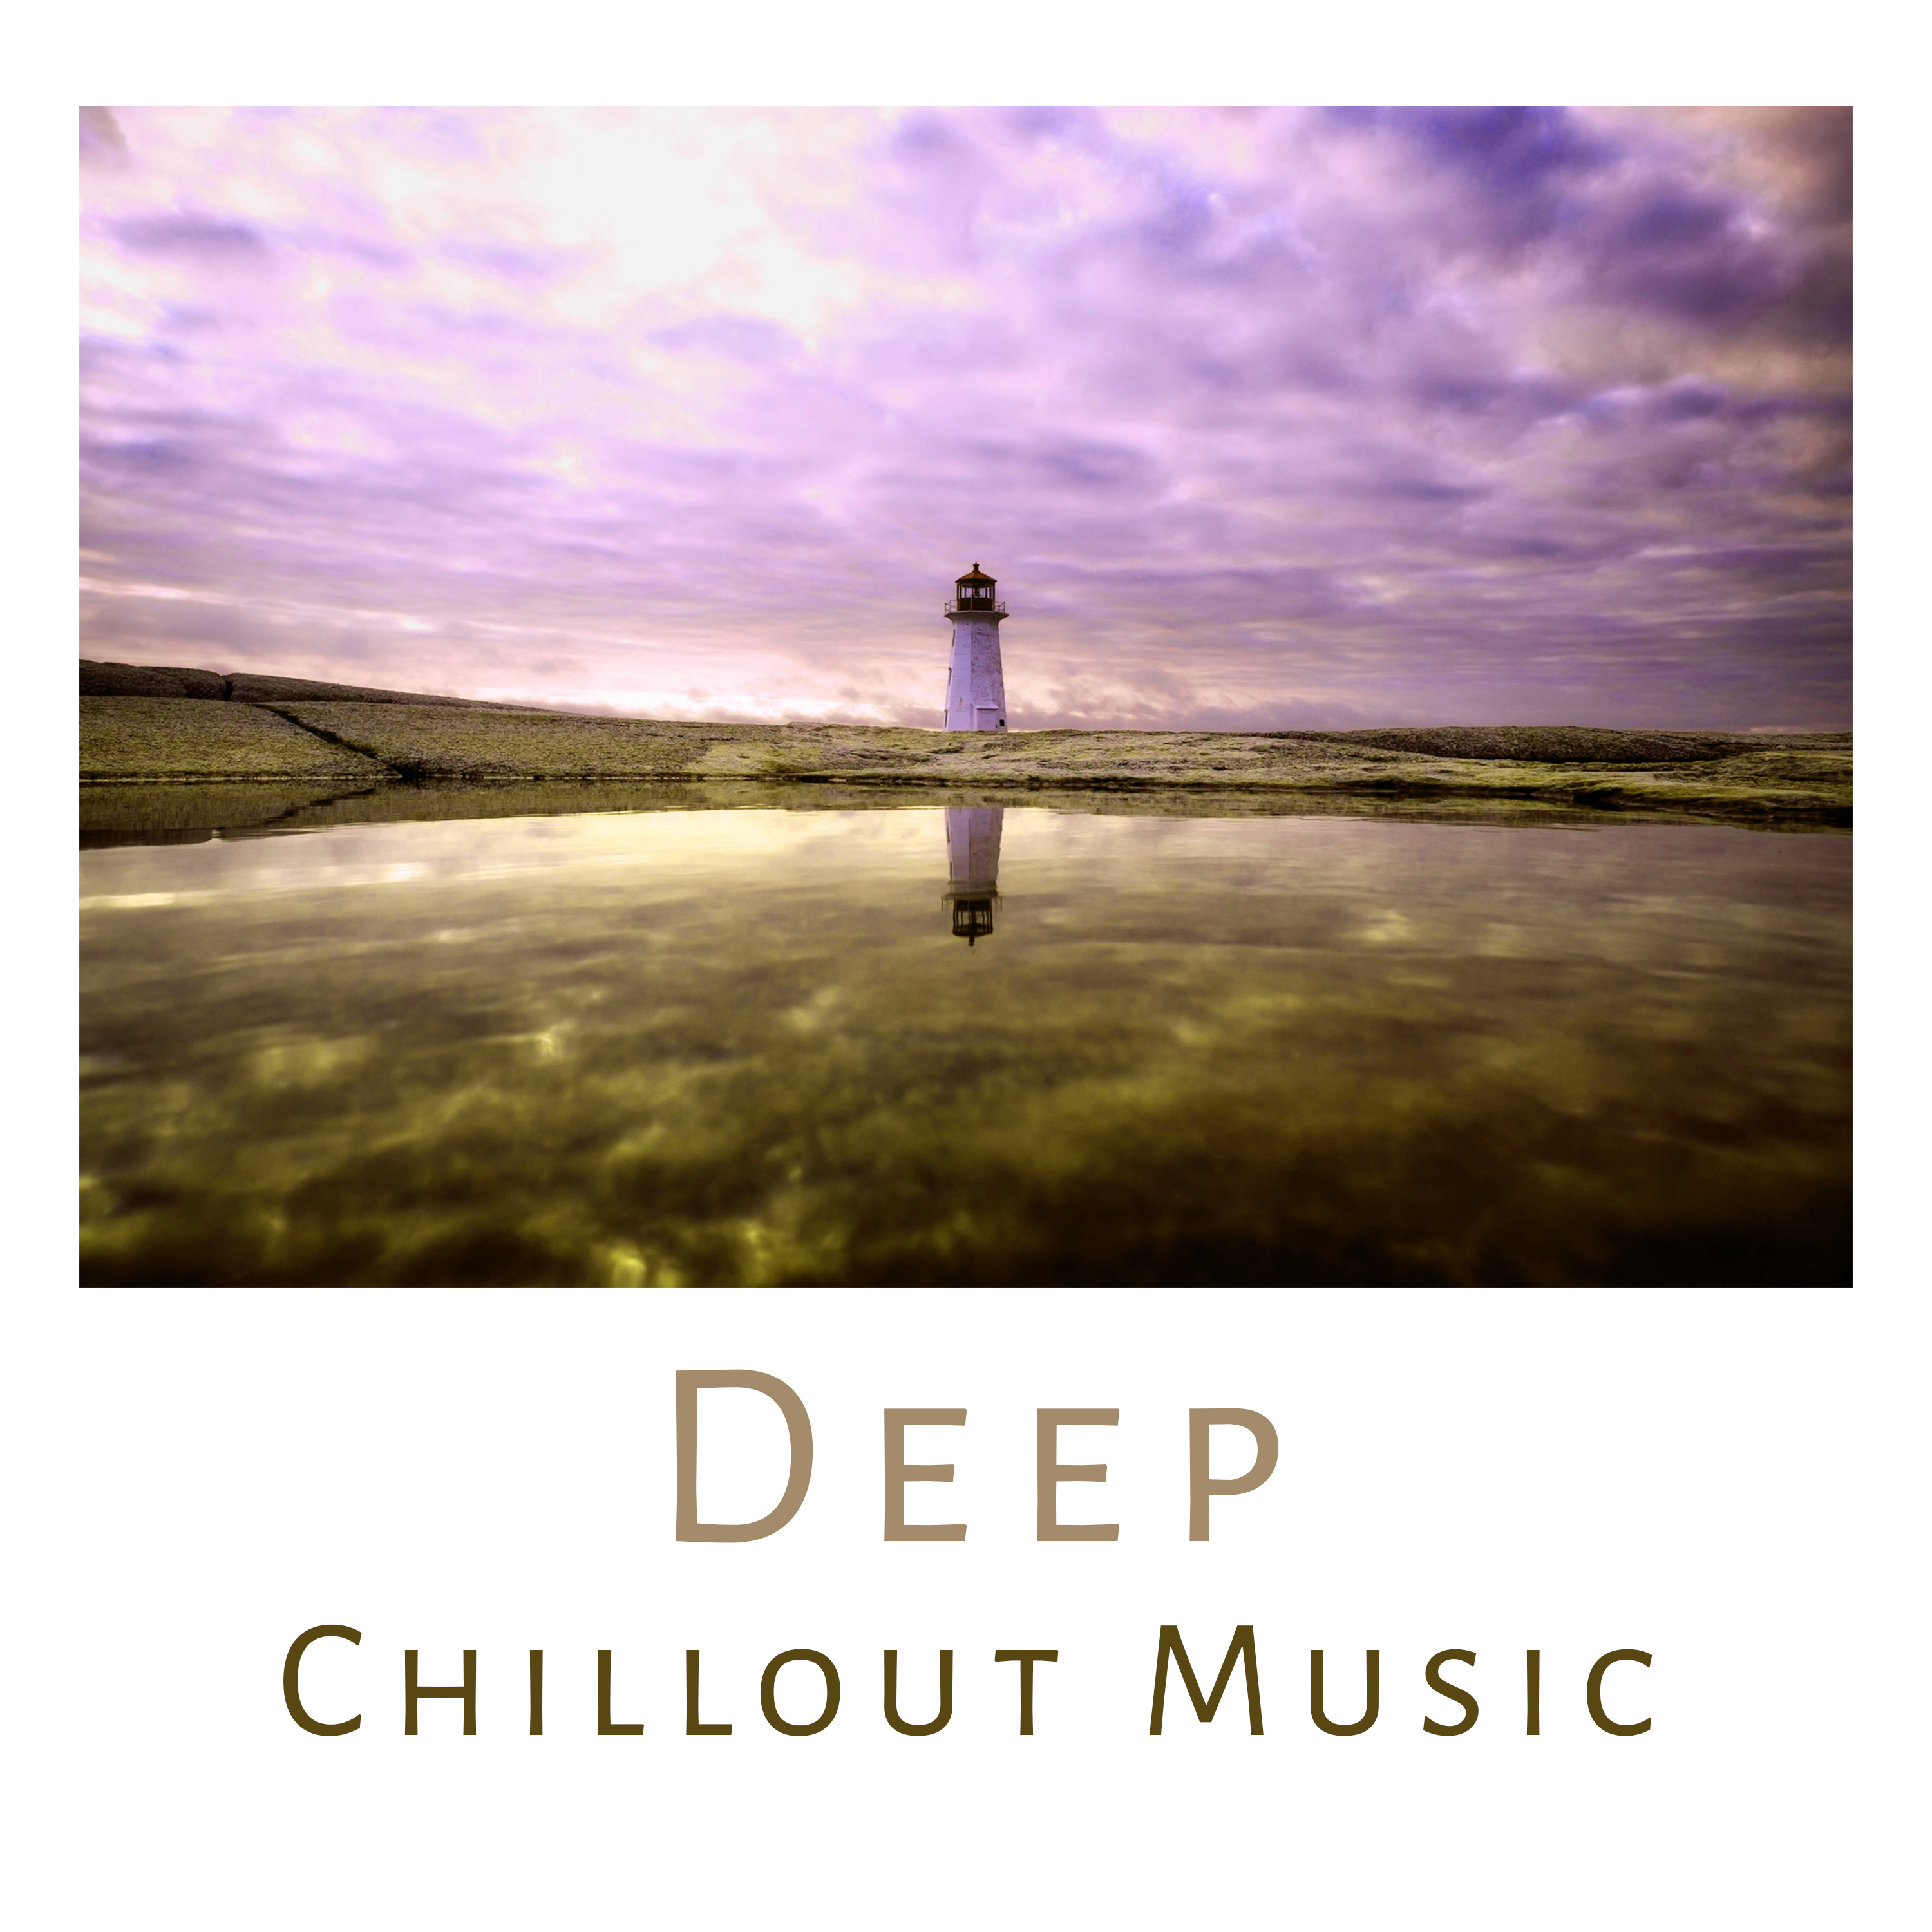 Deep Chillout Music – Peaceful Waves, Stress Relief, Chilled Melodies, Music to Rest